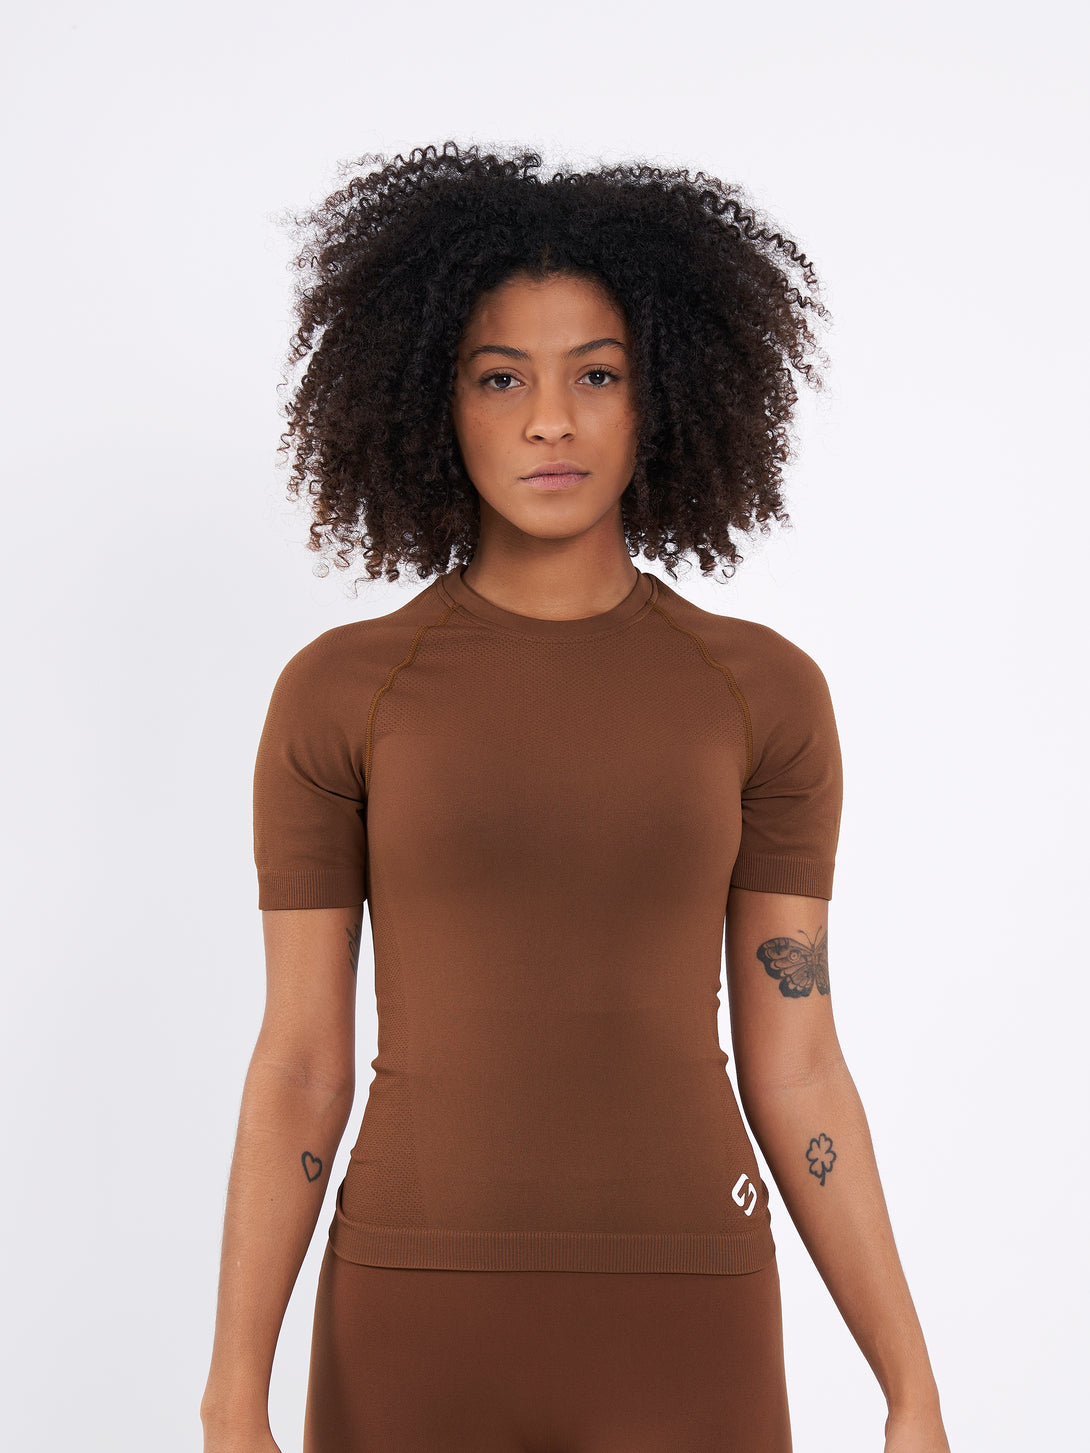 A Women Wearing Toffe Brown Color Zen Confidence Seamless Compressive T-Shirt. Sculpted Silhouette